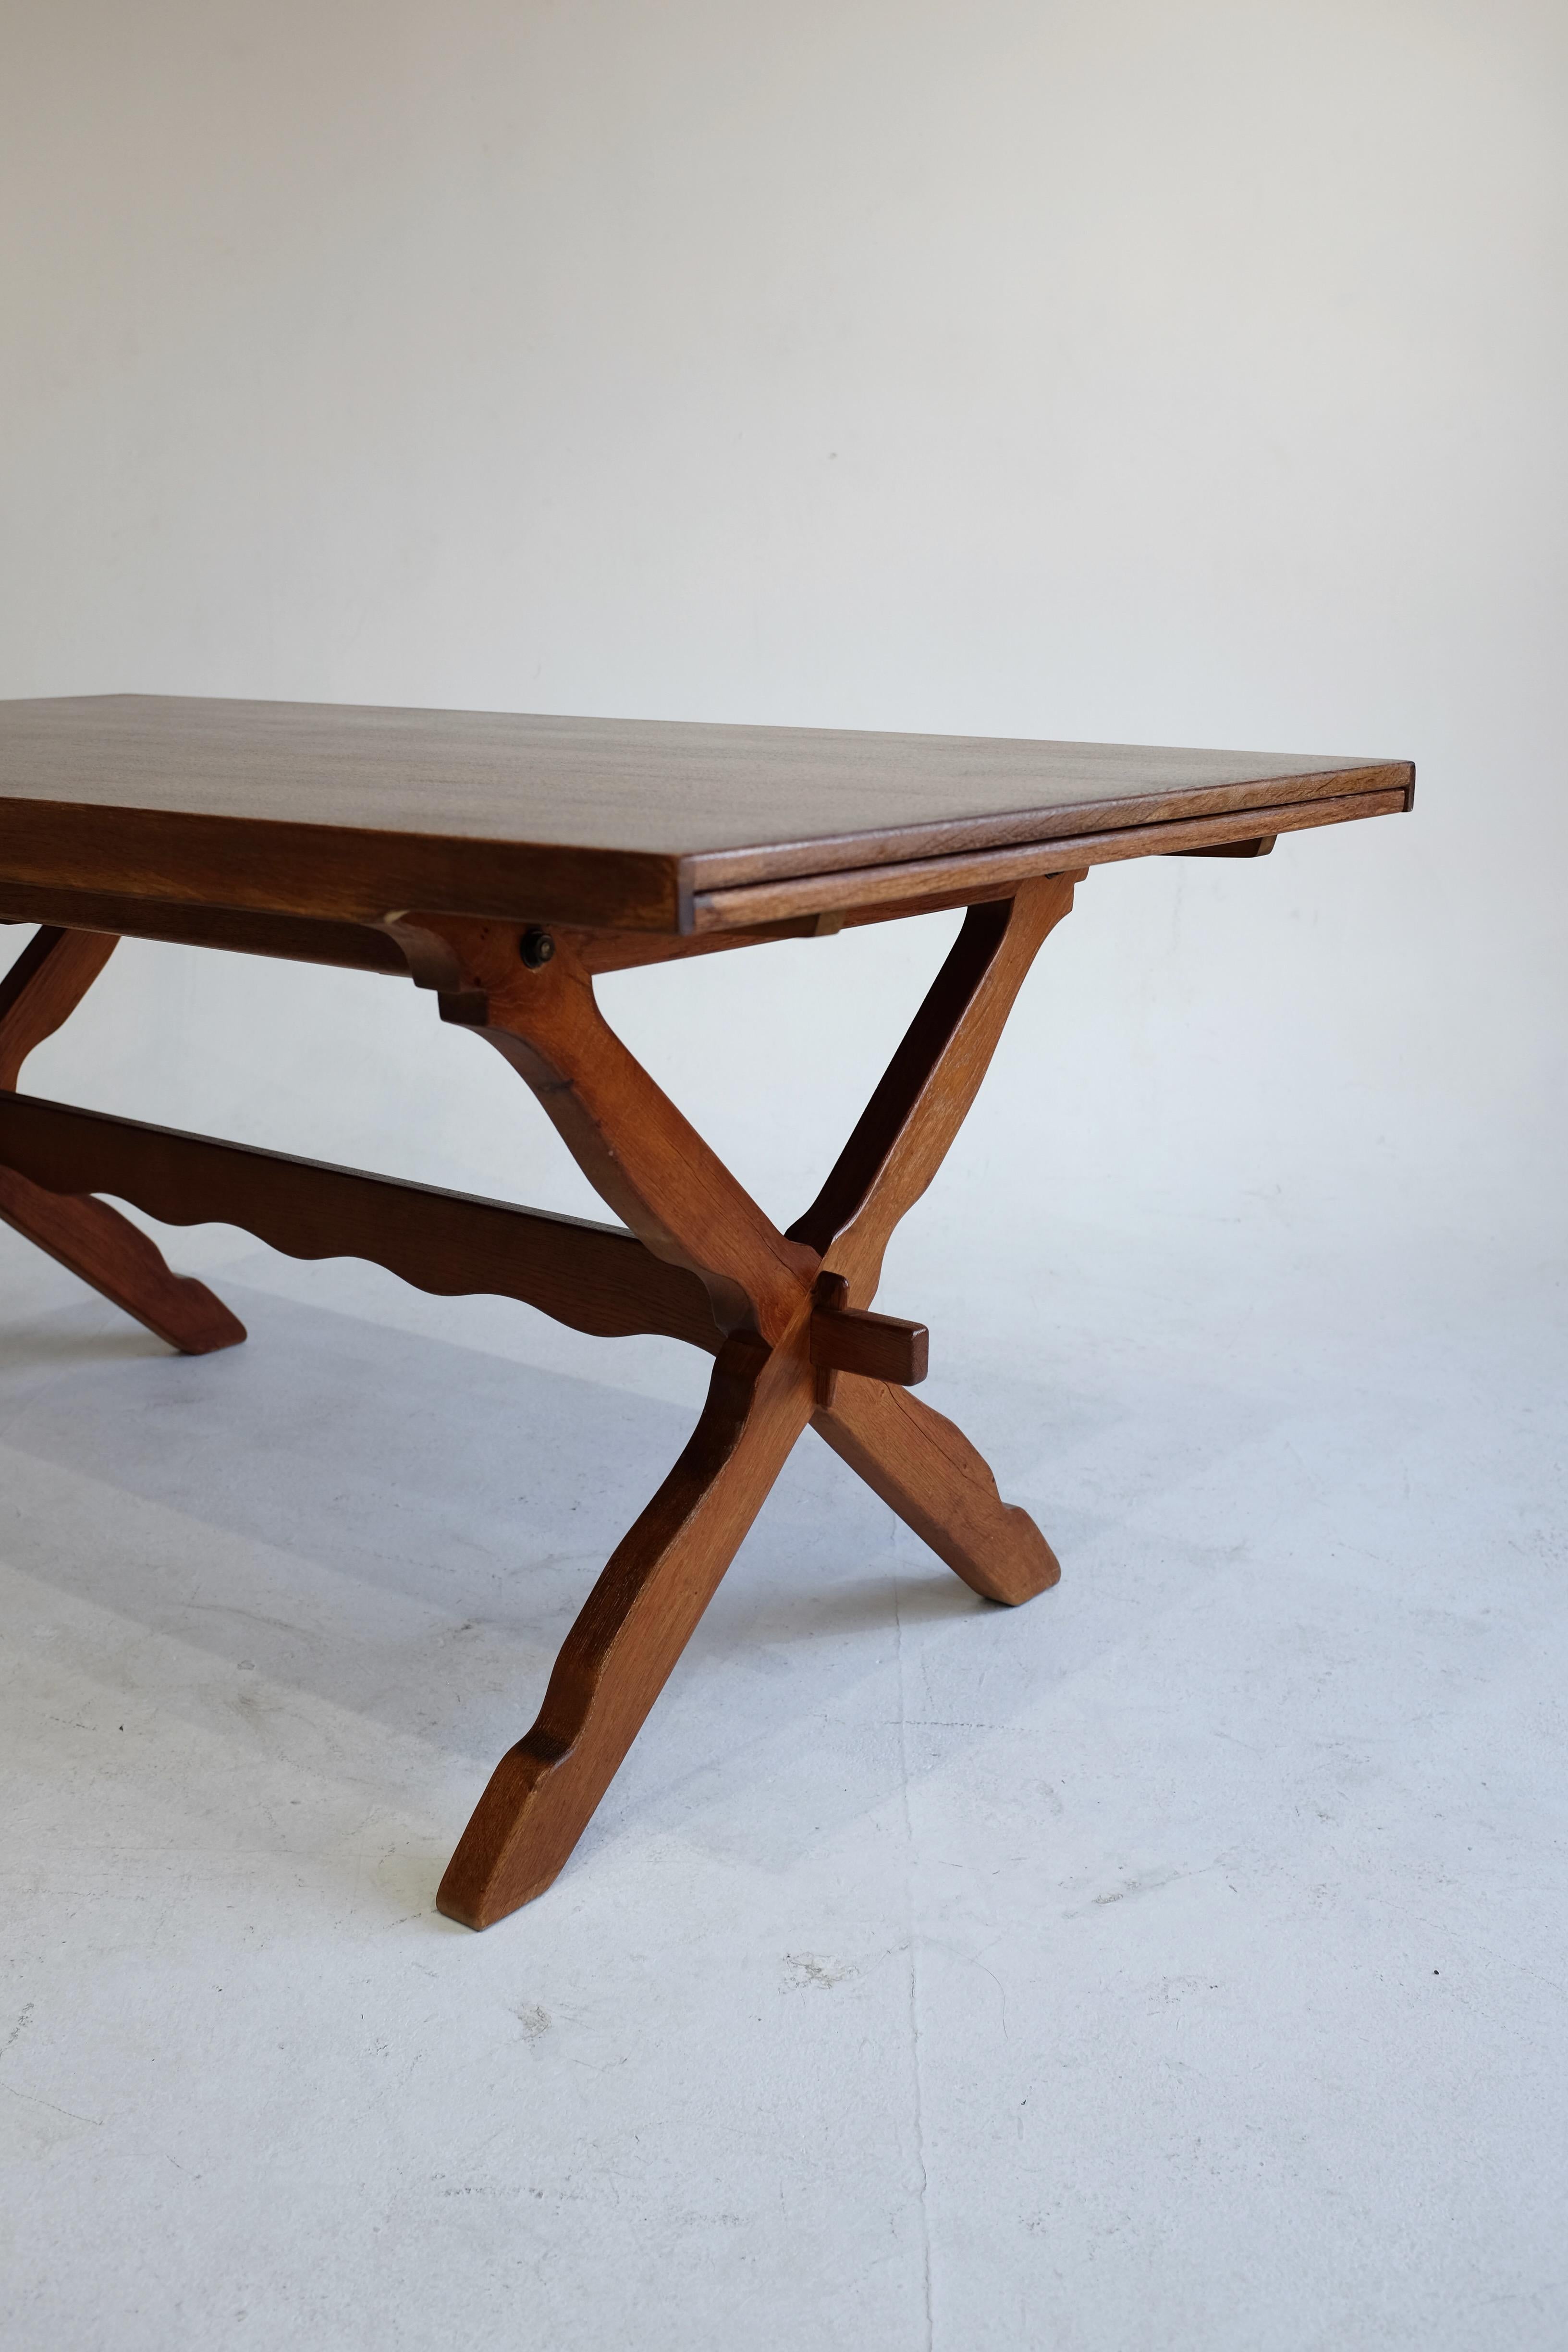 Beautiful carved Danish Modern dinning table by Henning Kjærnulf in a rustic style typical for his designs. The table consist of two cross legged at the ends with wave carved design and two extensions leafs to the table top. This oak table has been